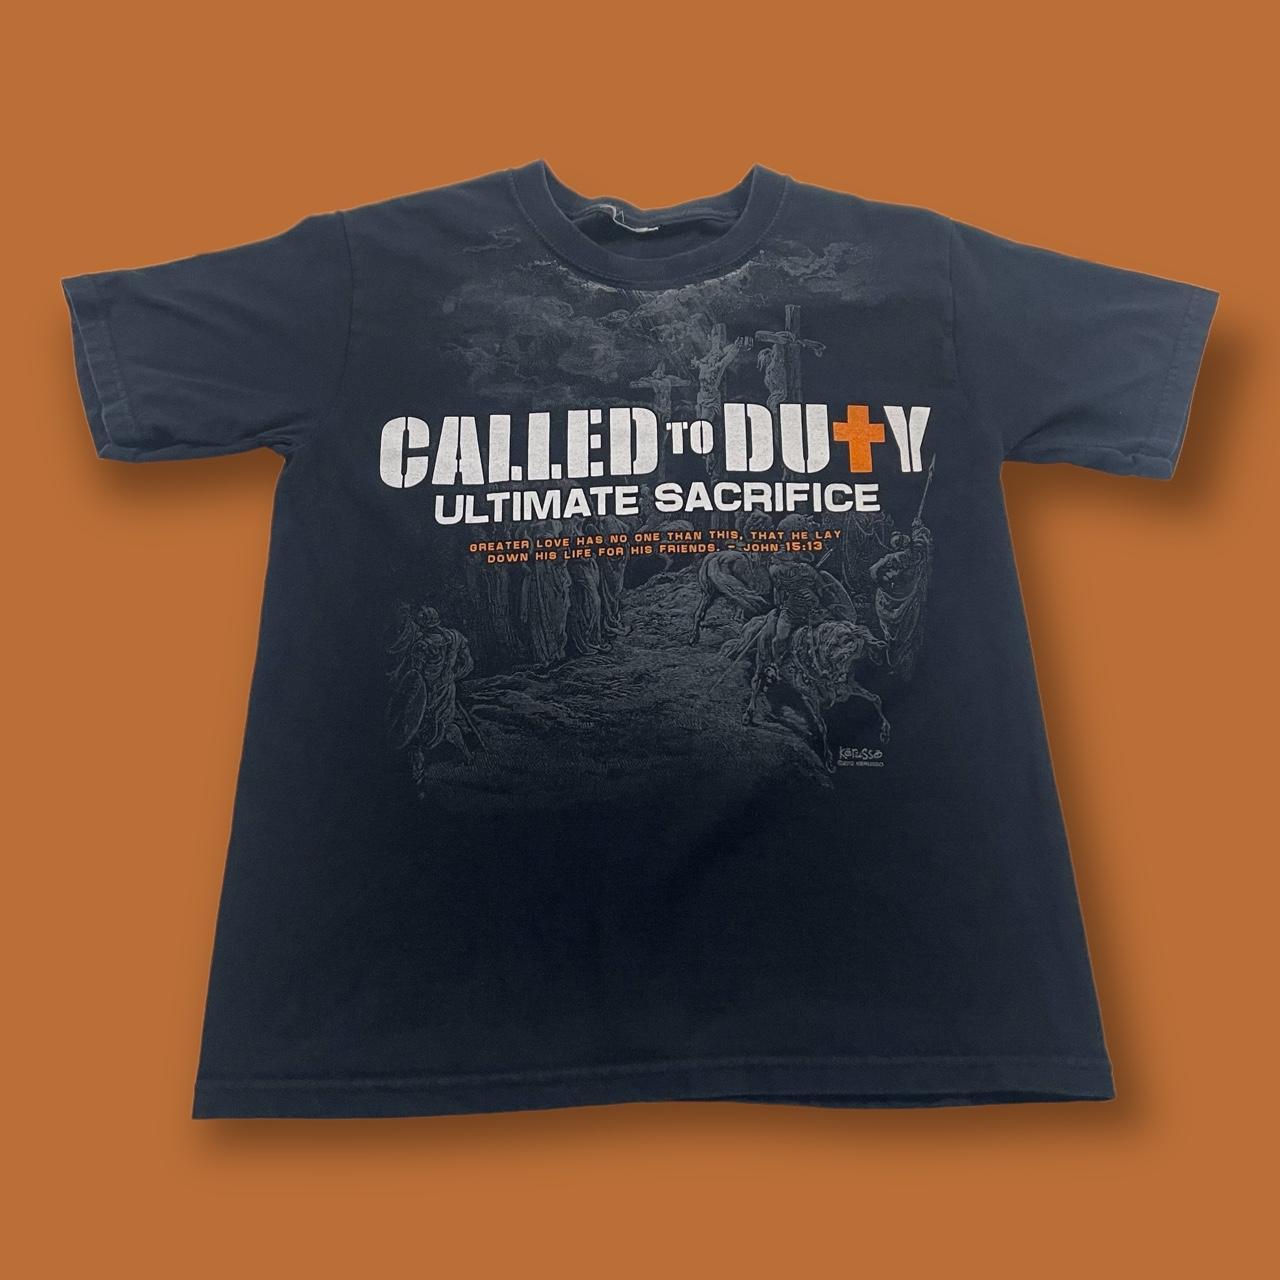 Call of Duty Parody Religion Tee “Called to Duty... - Depop